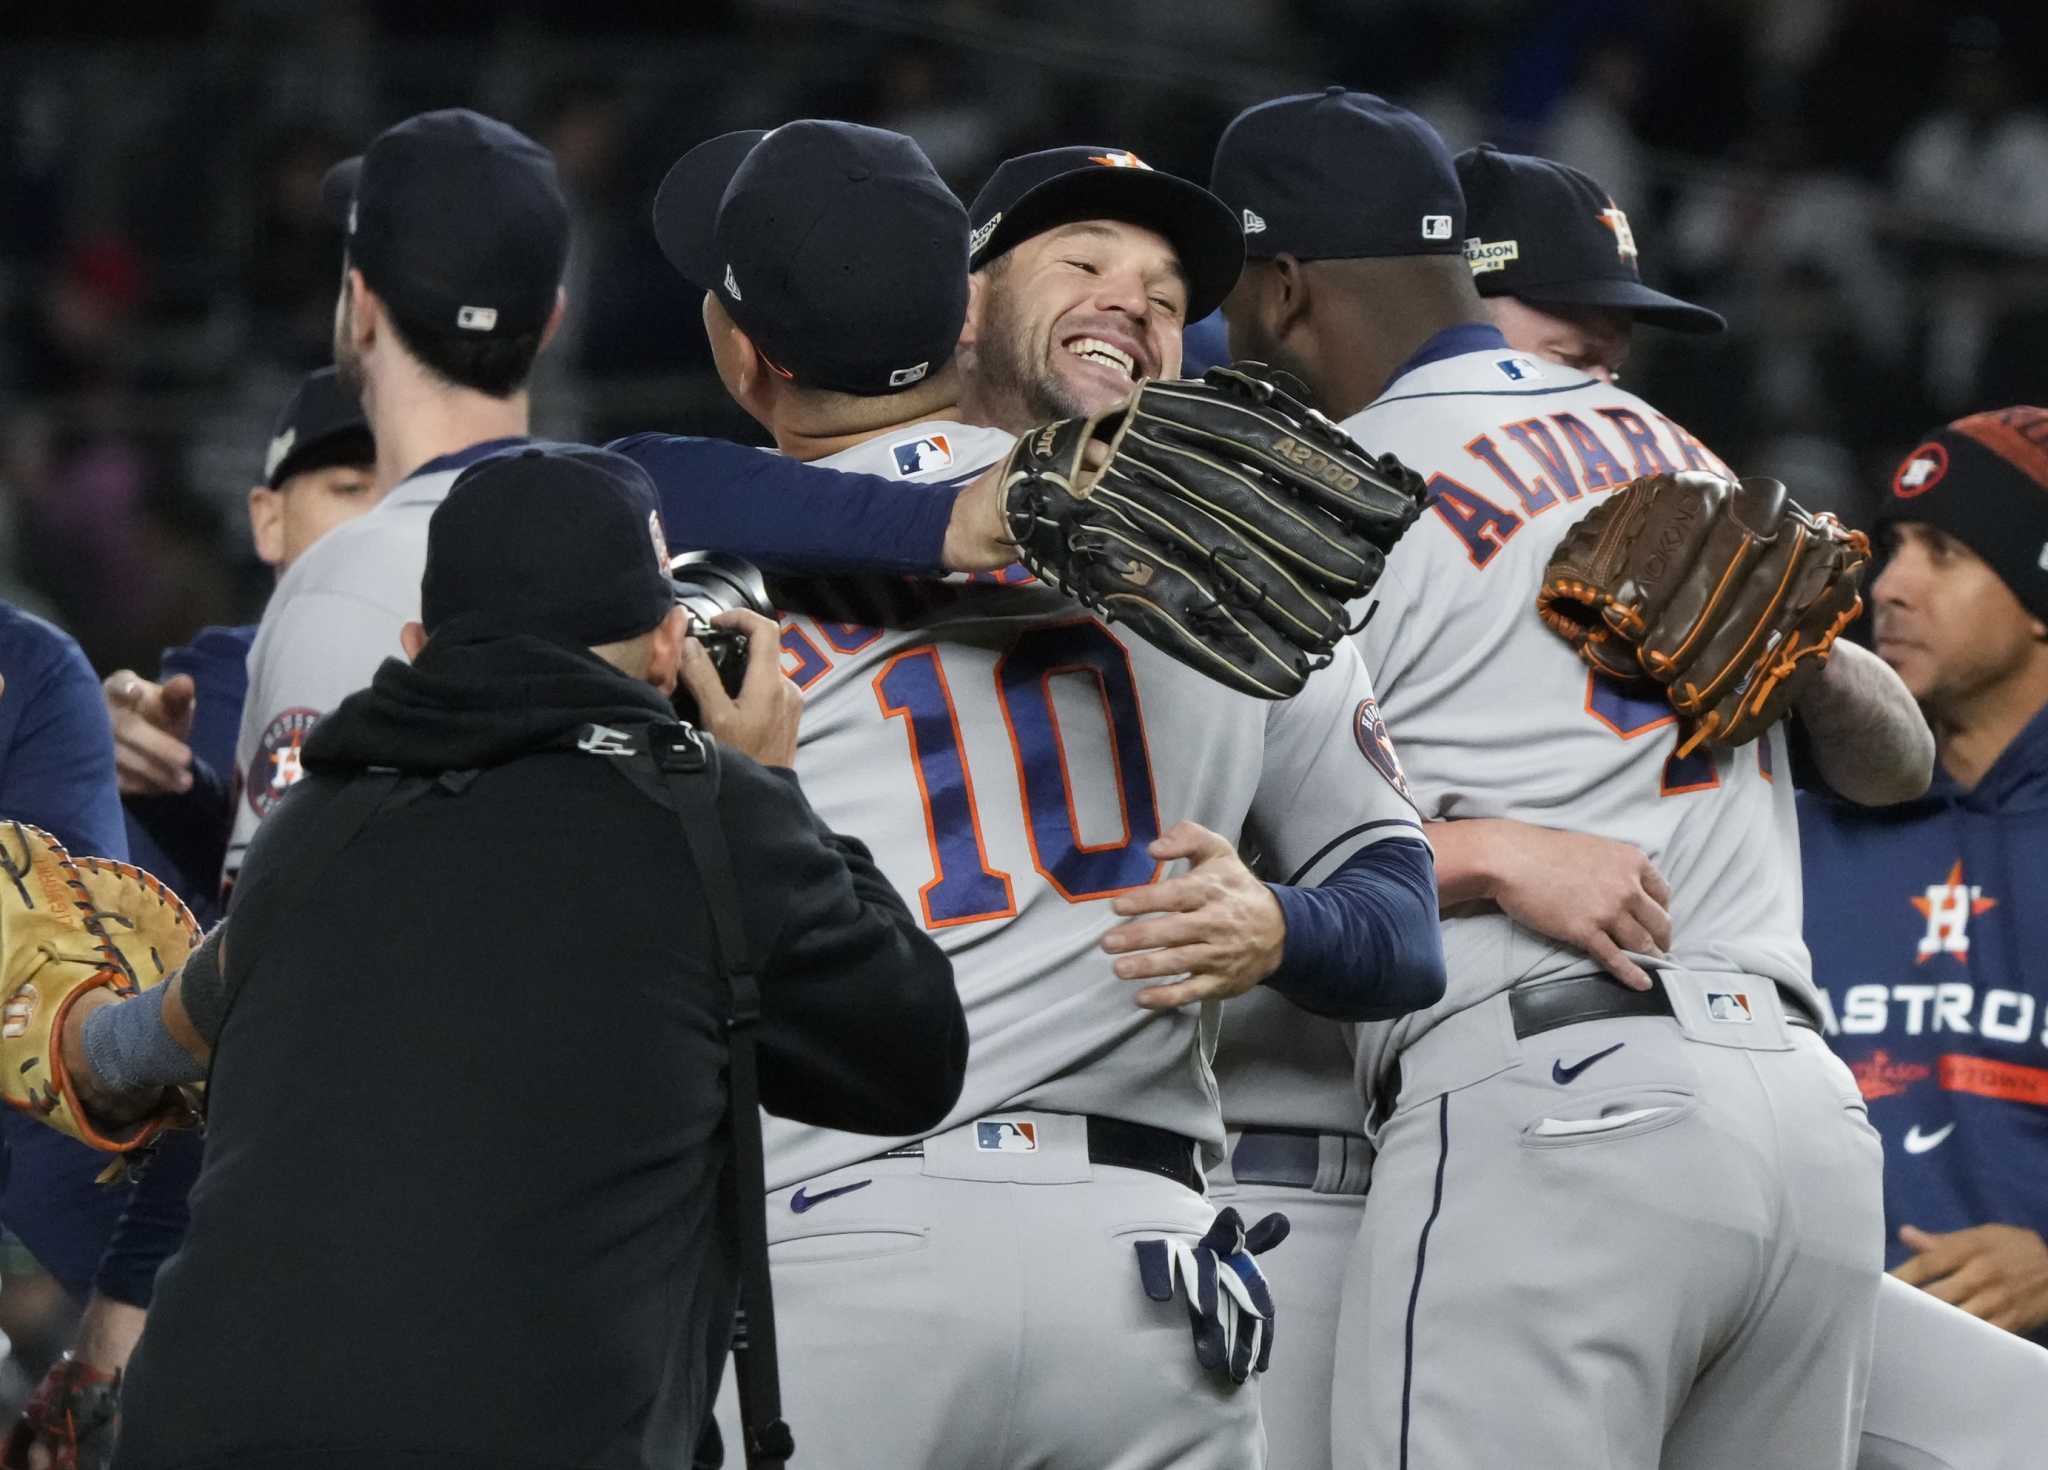 HISTORY EARNED! Astros defeat Dodgers in Game 7, win team's first